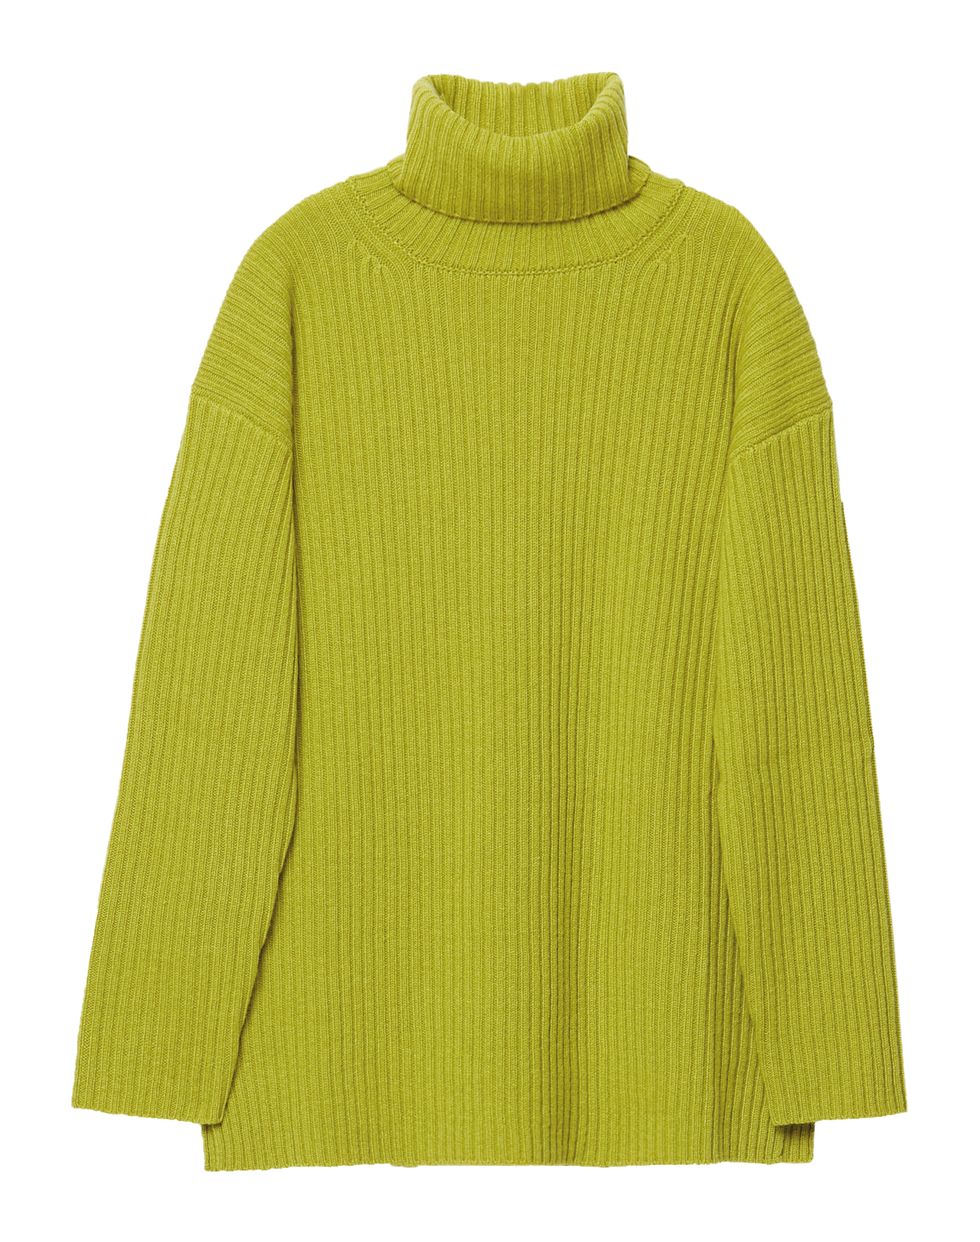 Clothing, Sleeve, Green, Outerwear, Yellow, Hood, Sweater, Neck, Wool, Jersey, 